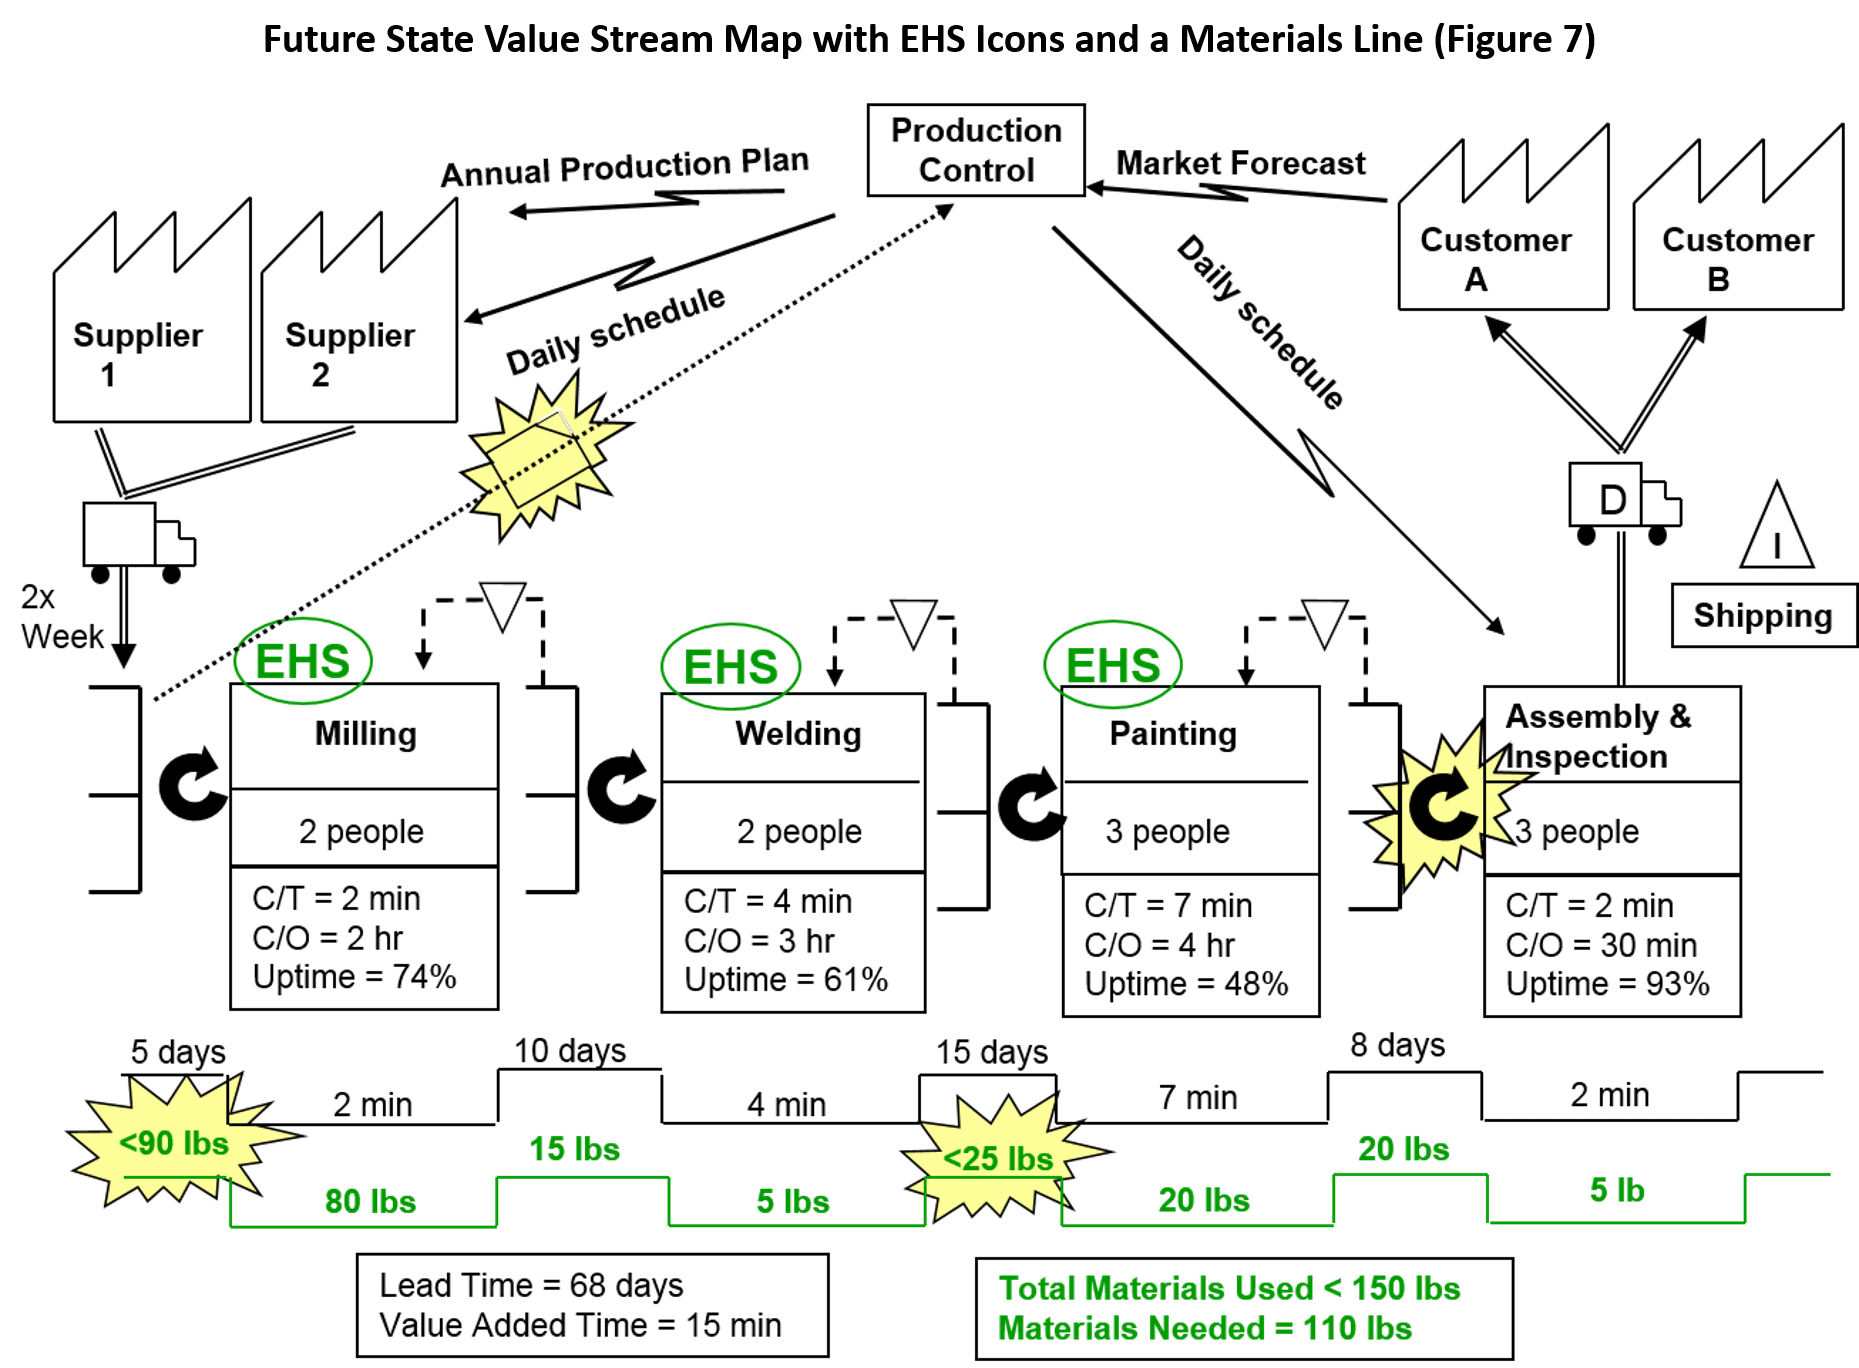 Future State VSM with EHS Icons and Materials Line (Figure 7)